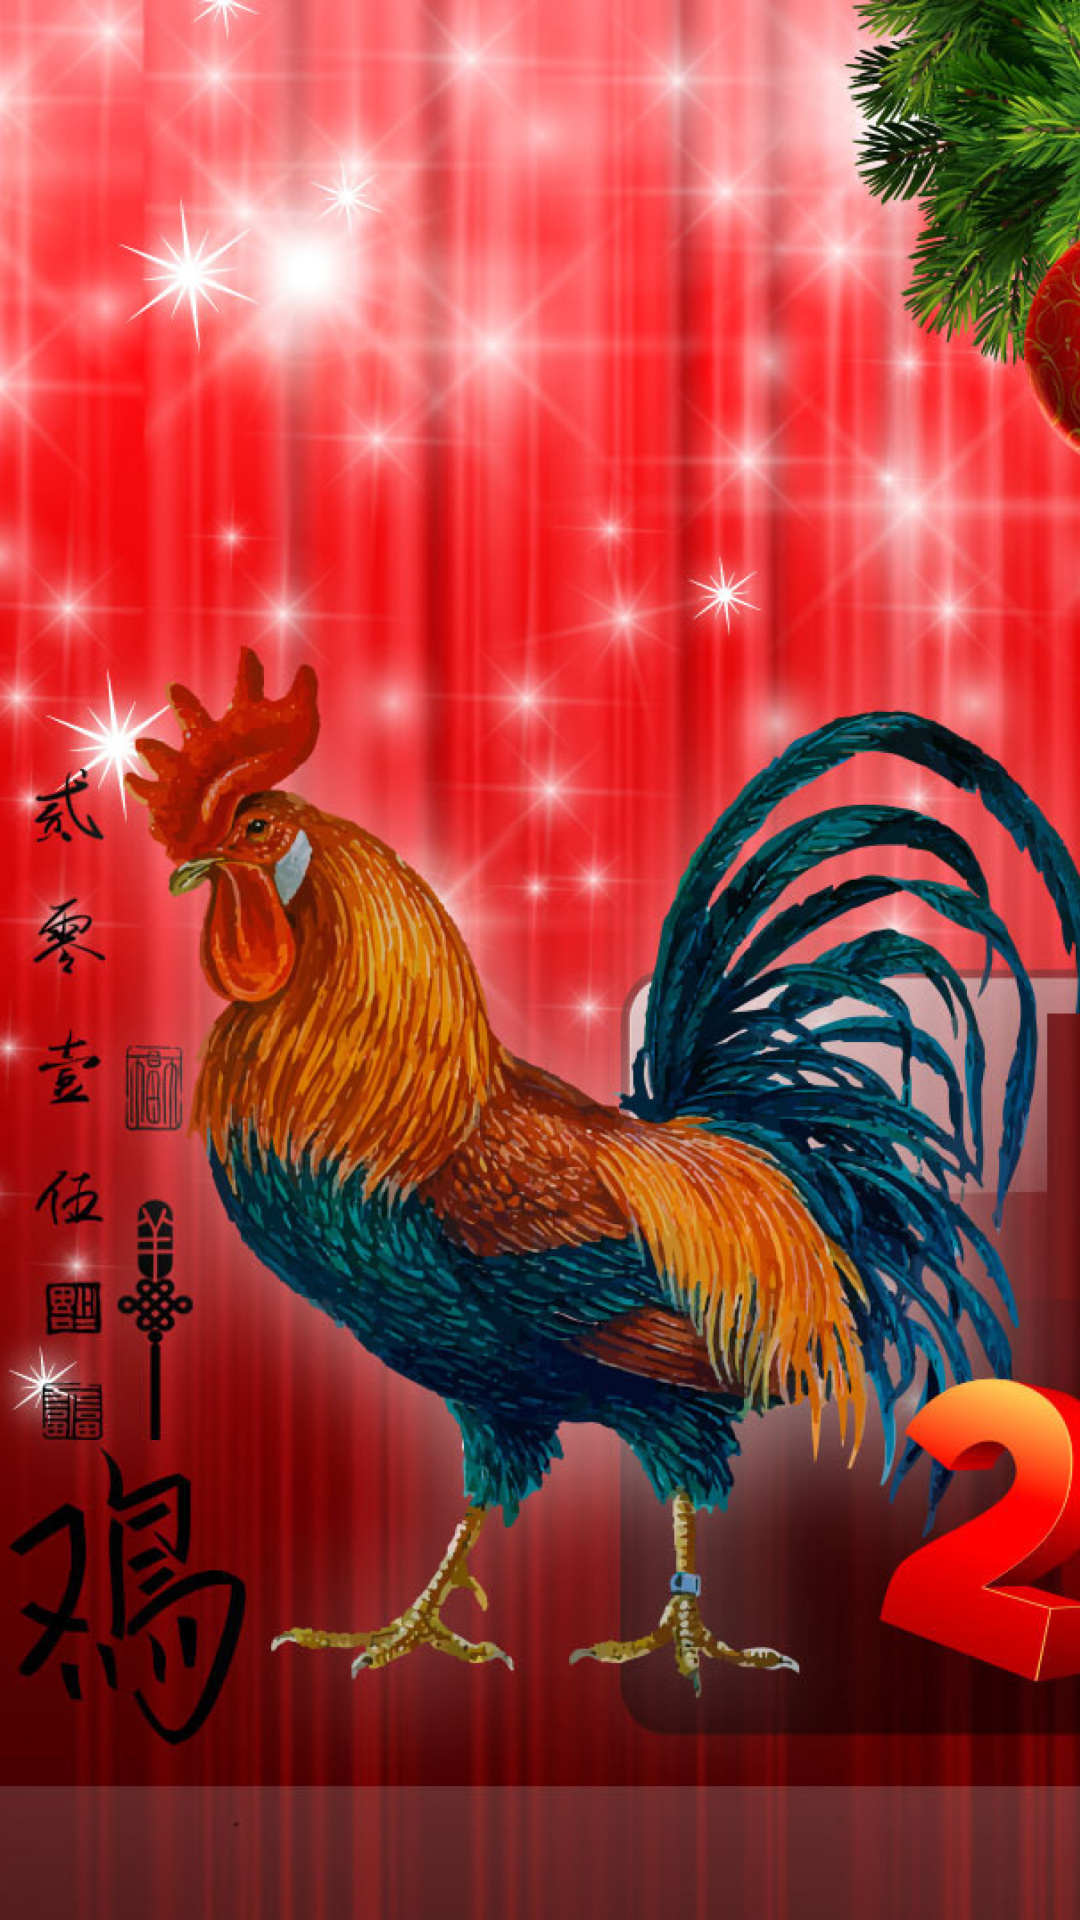 Sfondi 2017 New Year Red Cock Rooster 1080x1920